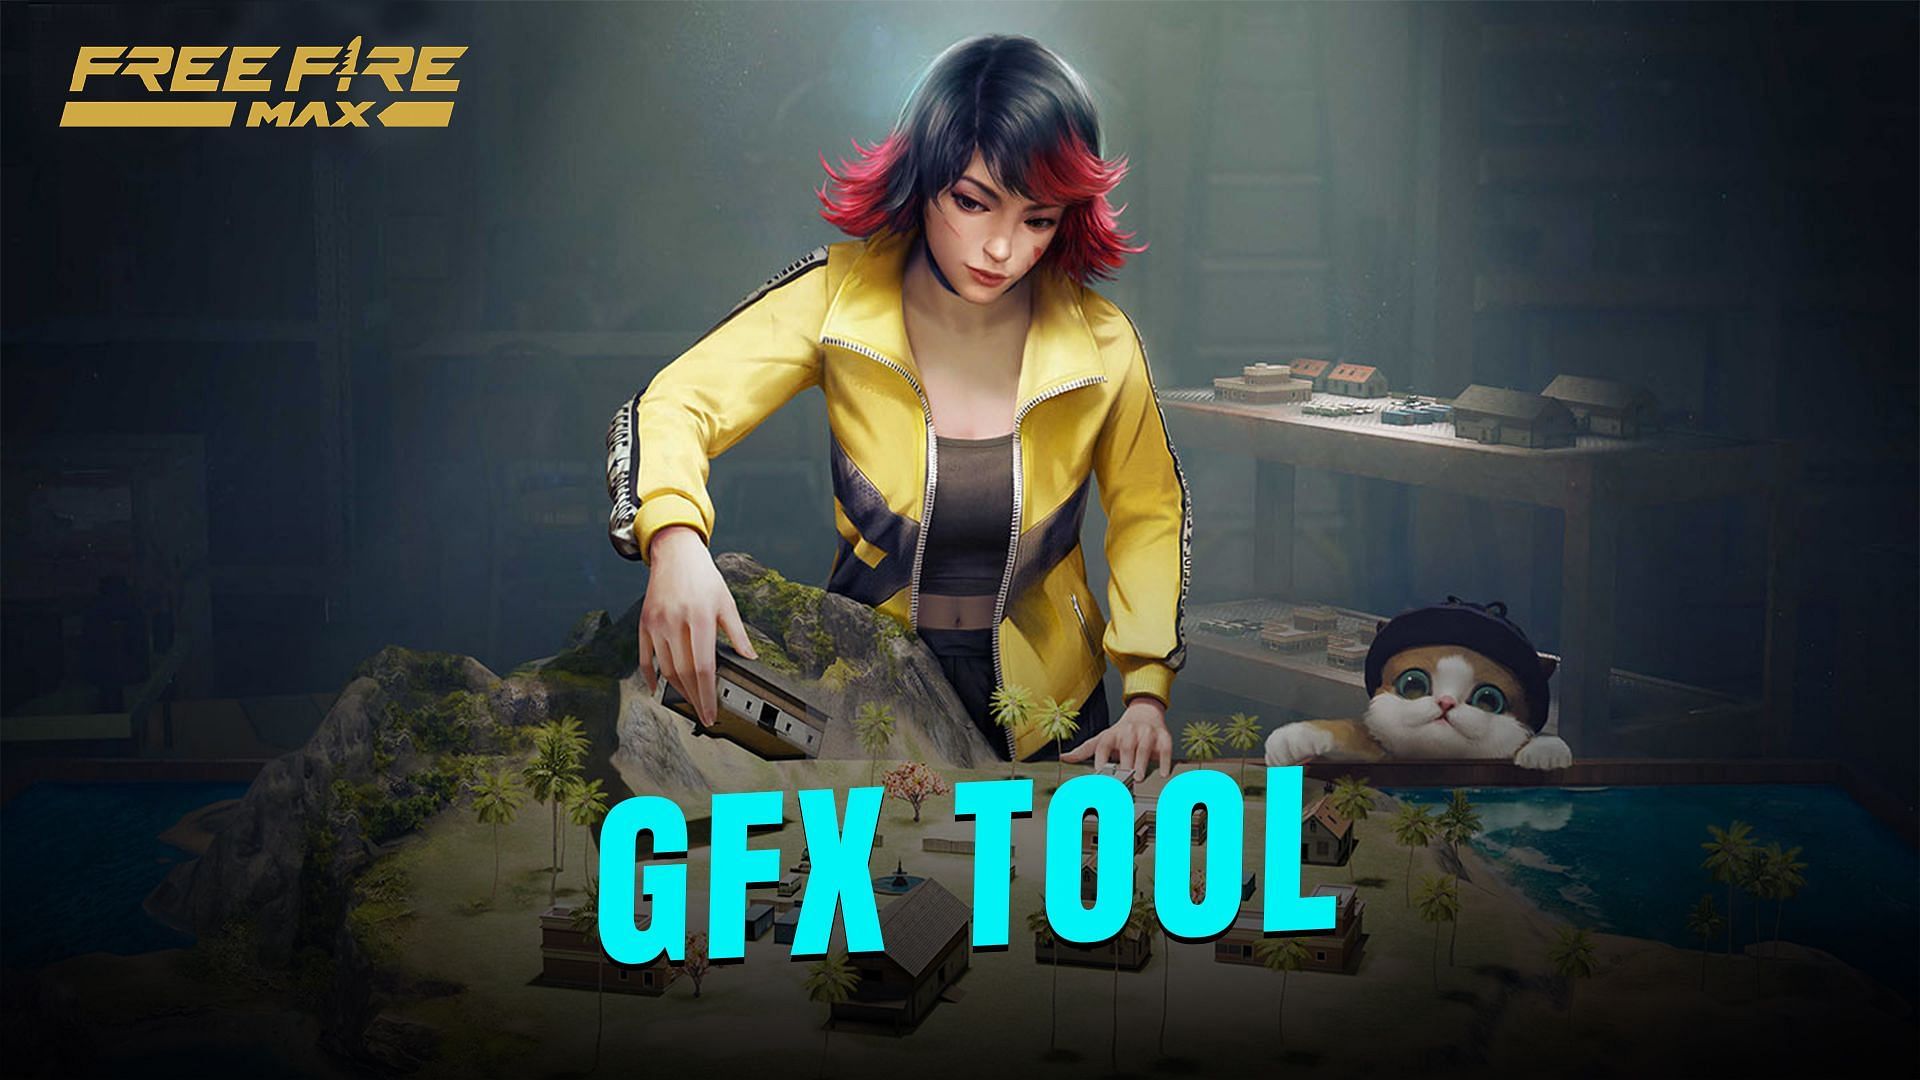 Fact Check: Can Free Fire players be banned for using GFX tool?